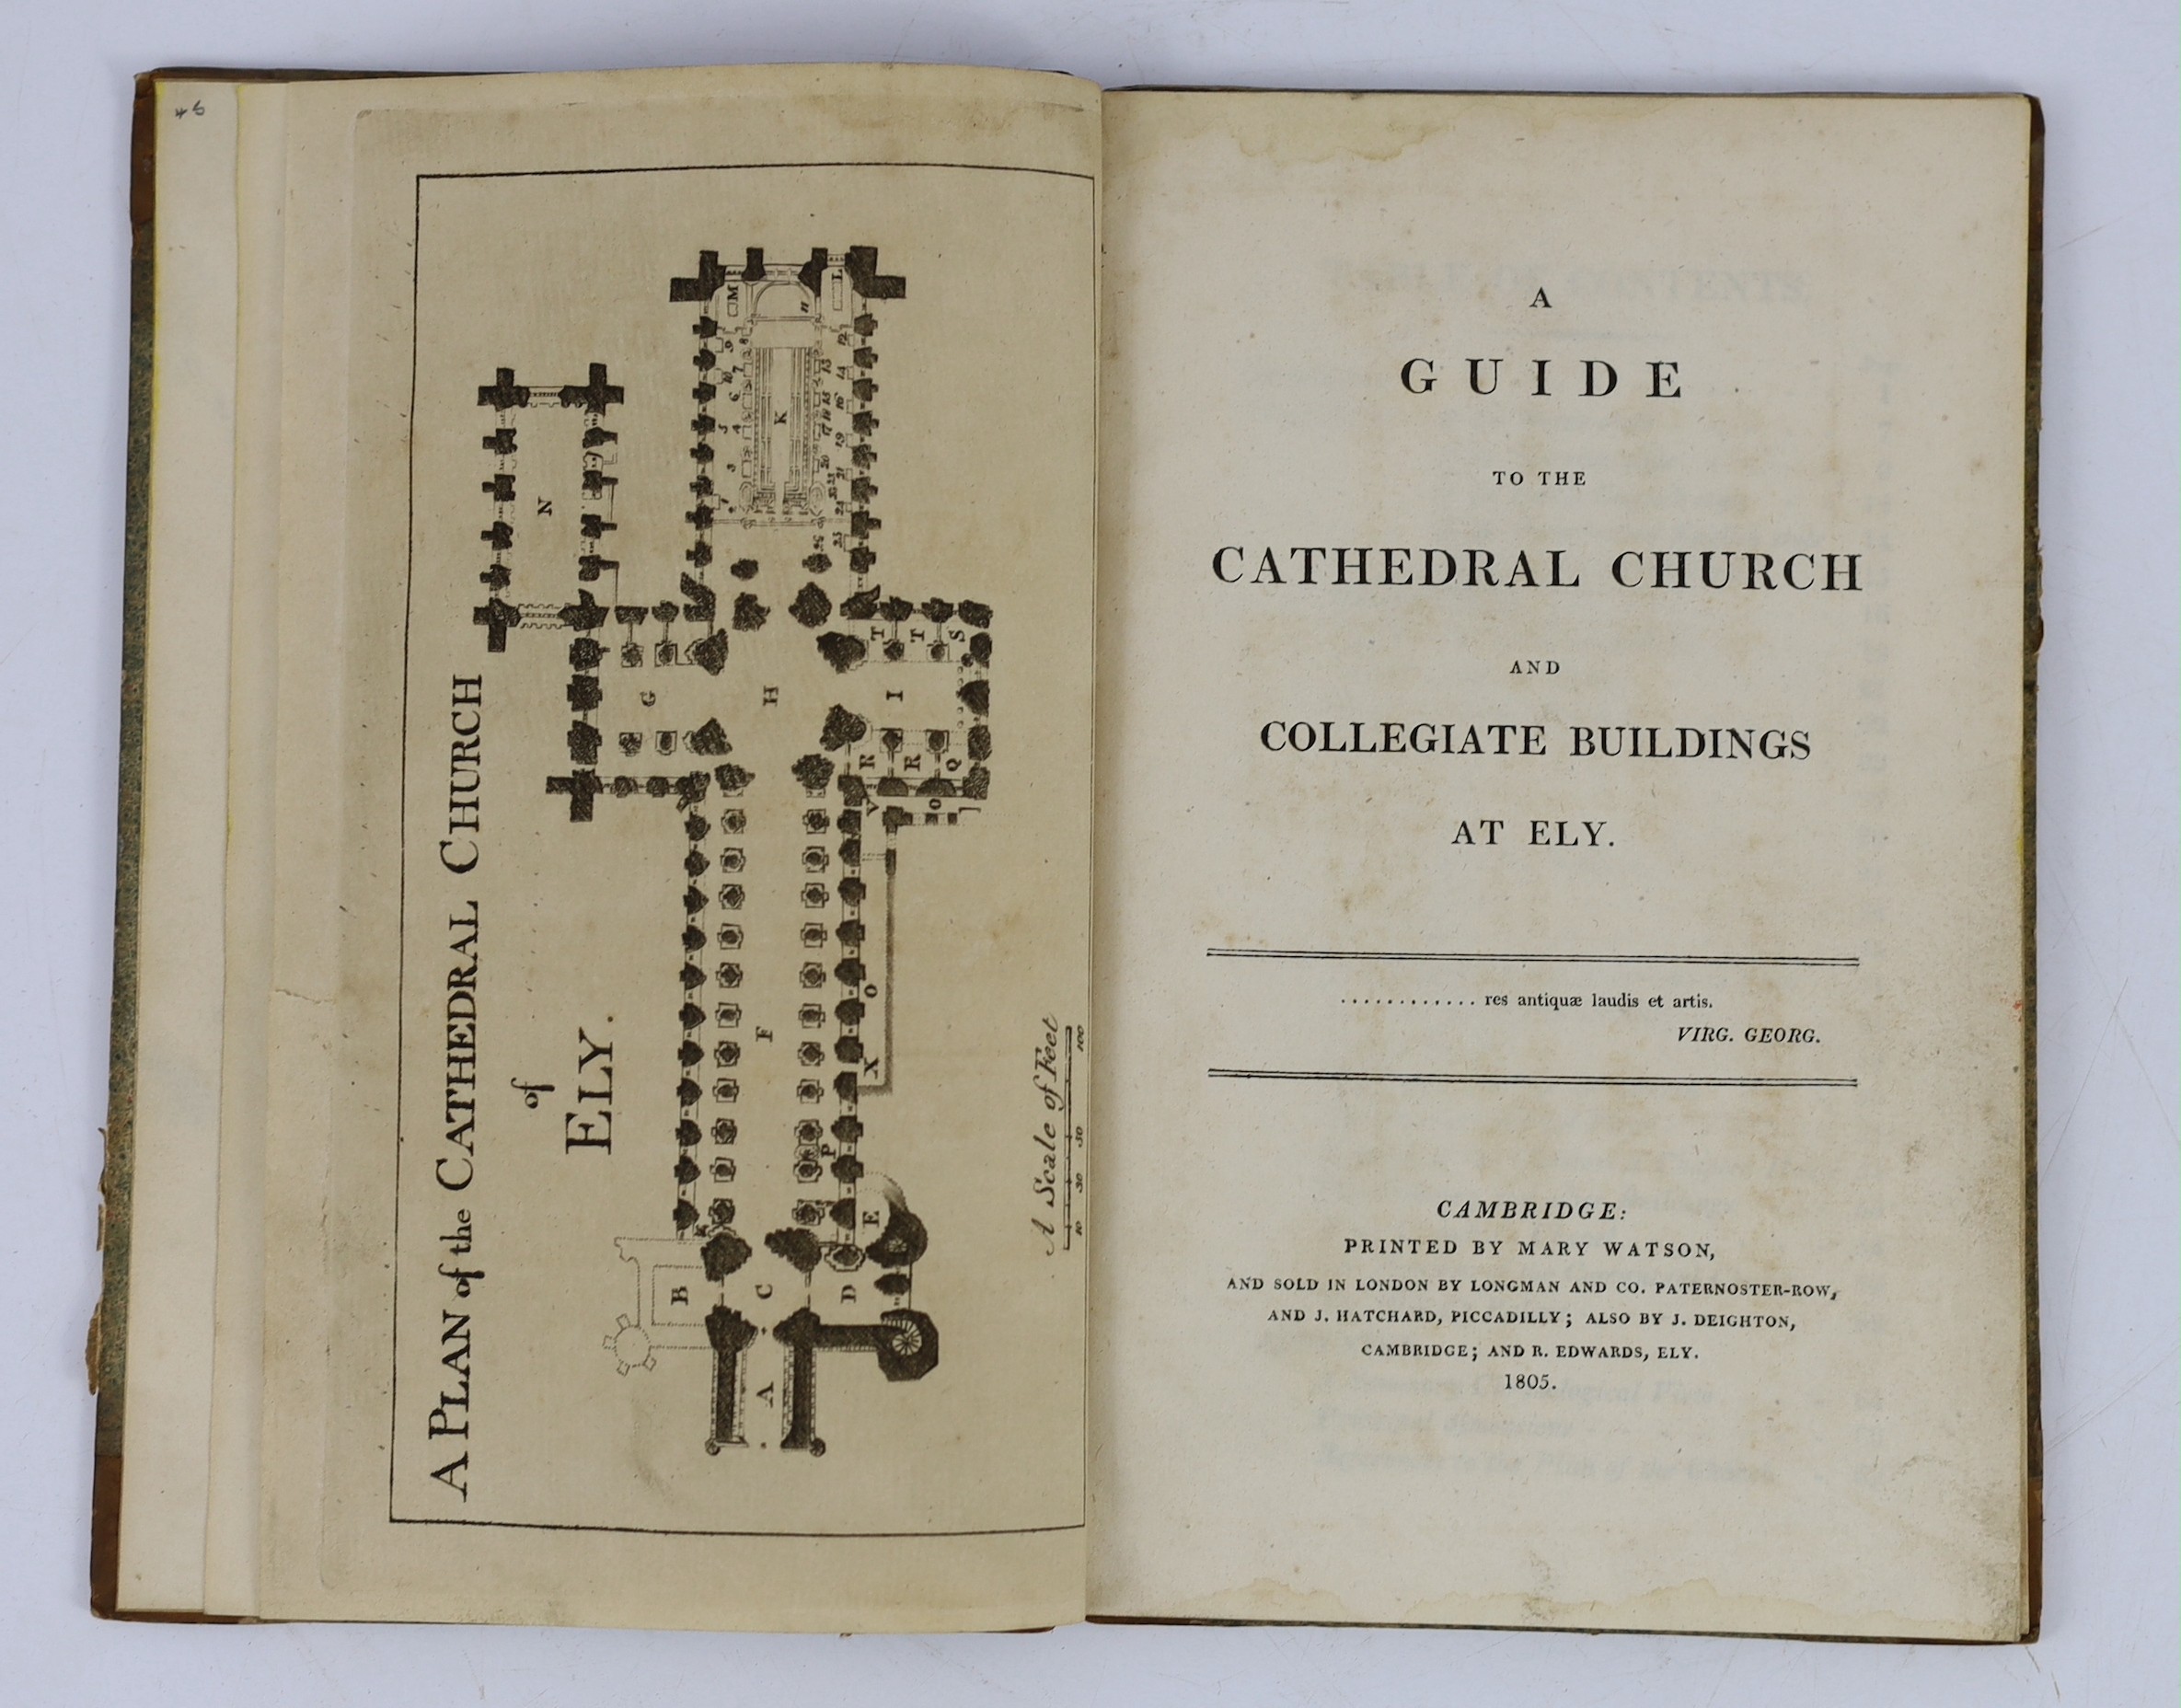 CAMBS: Millers, George - A Description of the Cathedral Church of Ely; with some account of the Coventual Buildings. 3rd edition. 17 plates and a plan; original blind-decorated cloth.